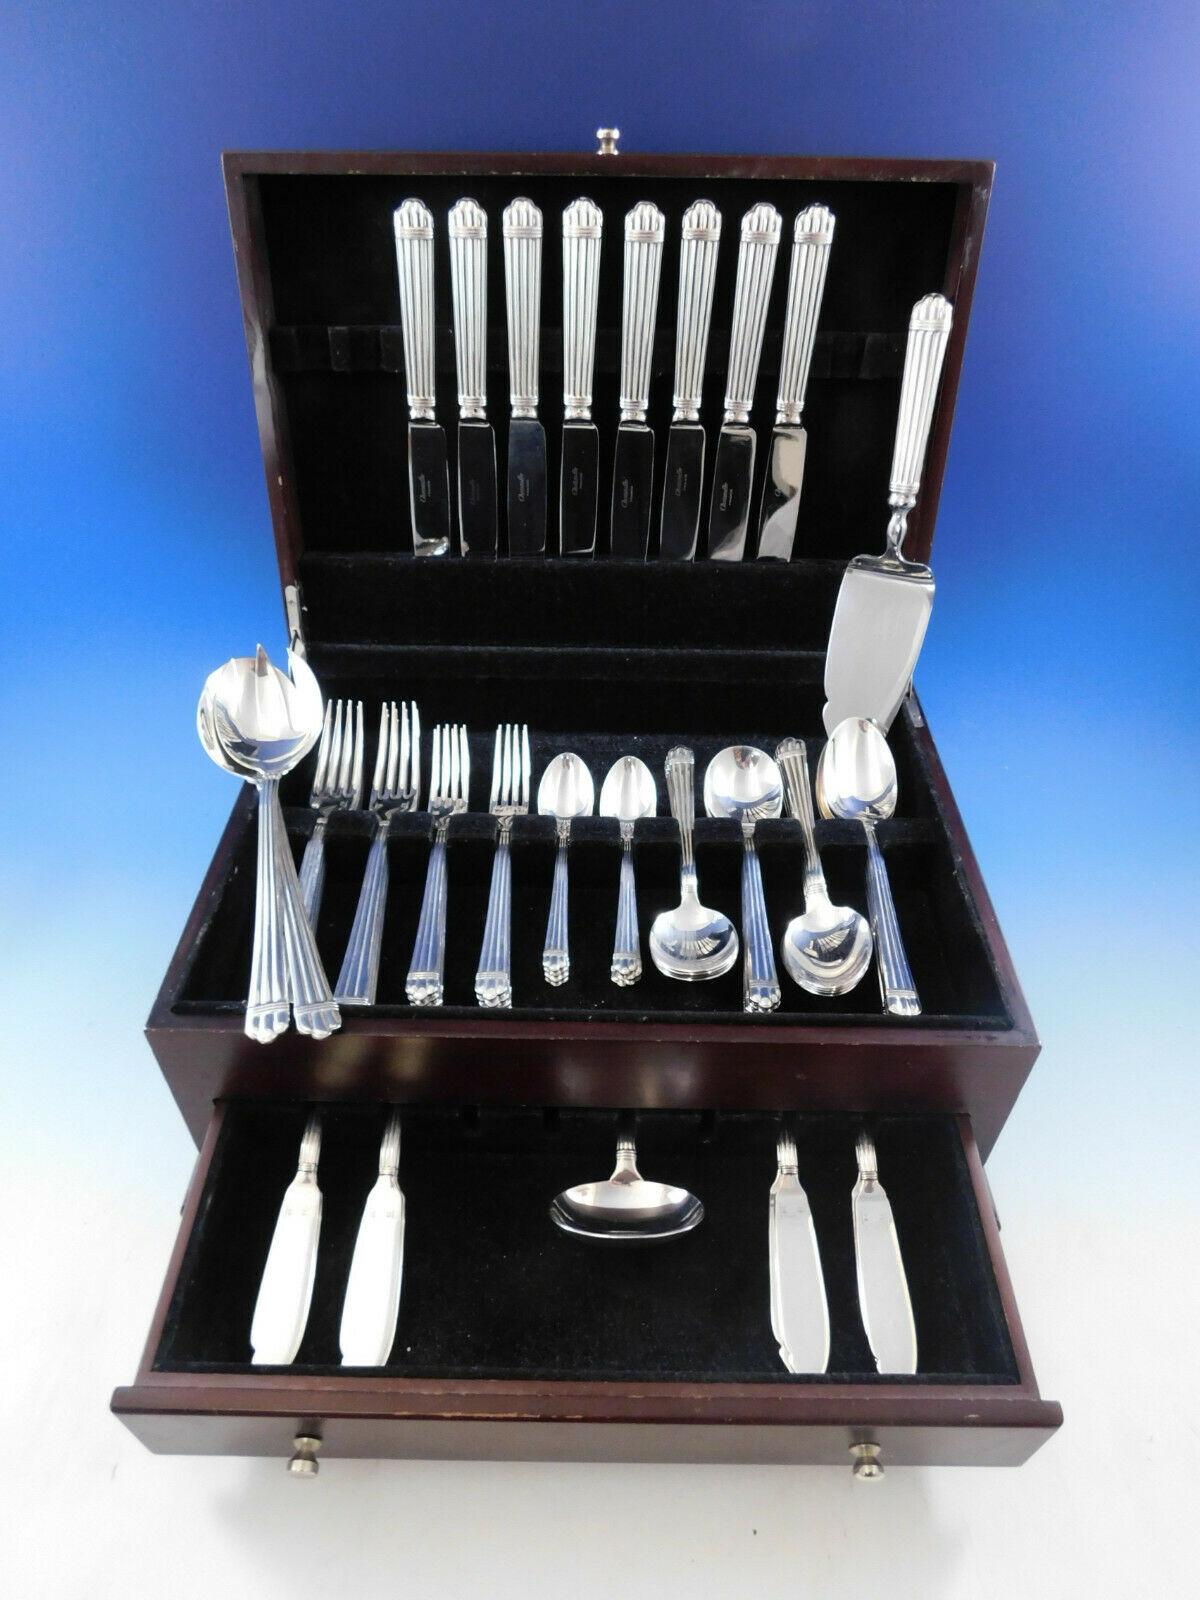 Dinner size Aria by Christofle France estate silverplate flatware set of 60 pieces. This set includes:

8 dinner size knives, 9 3/4